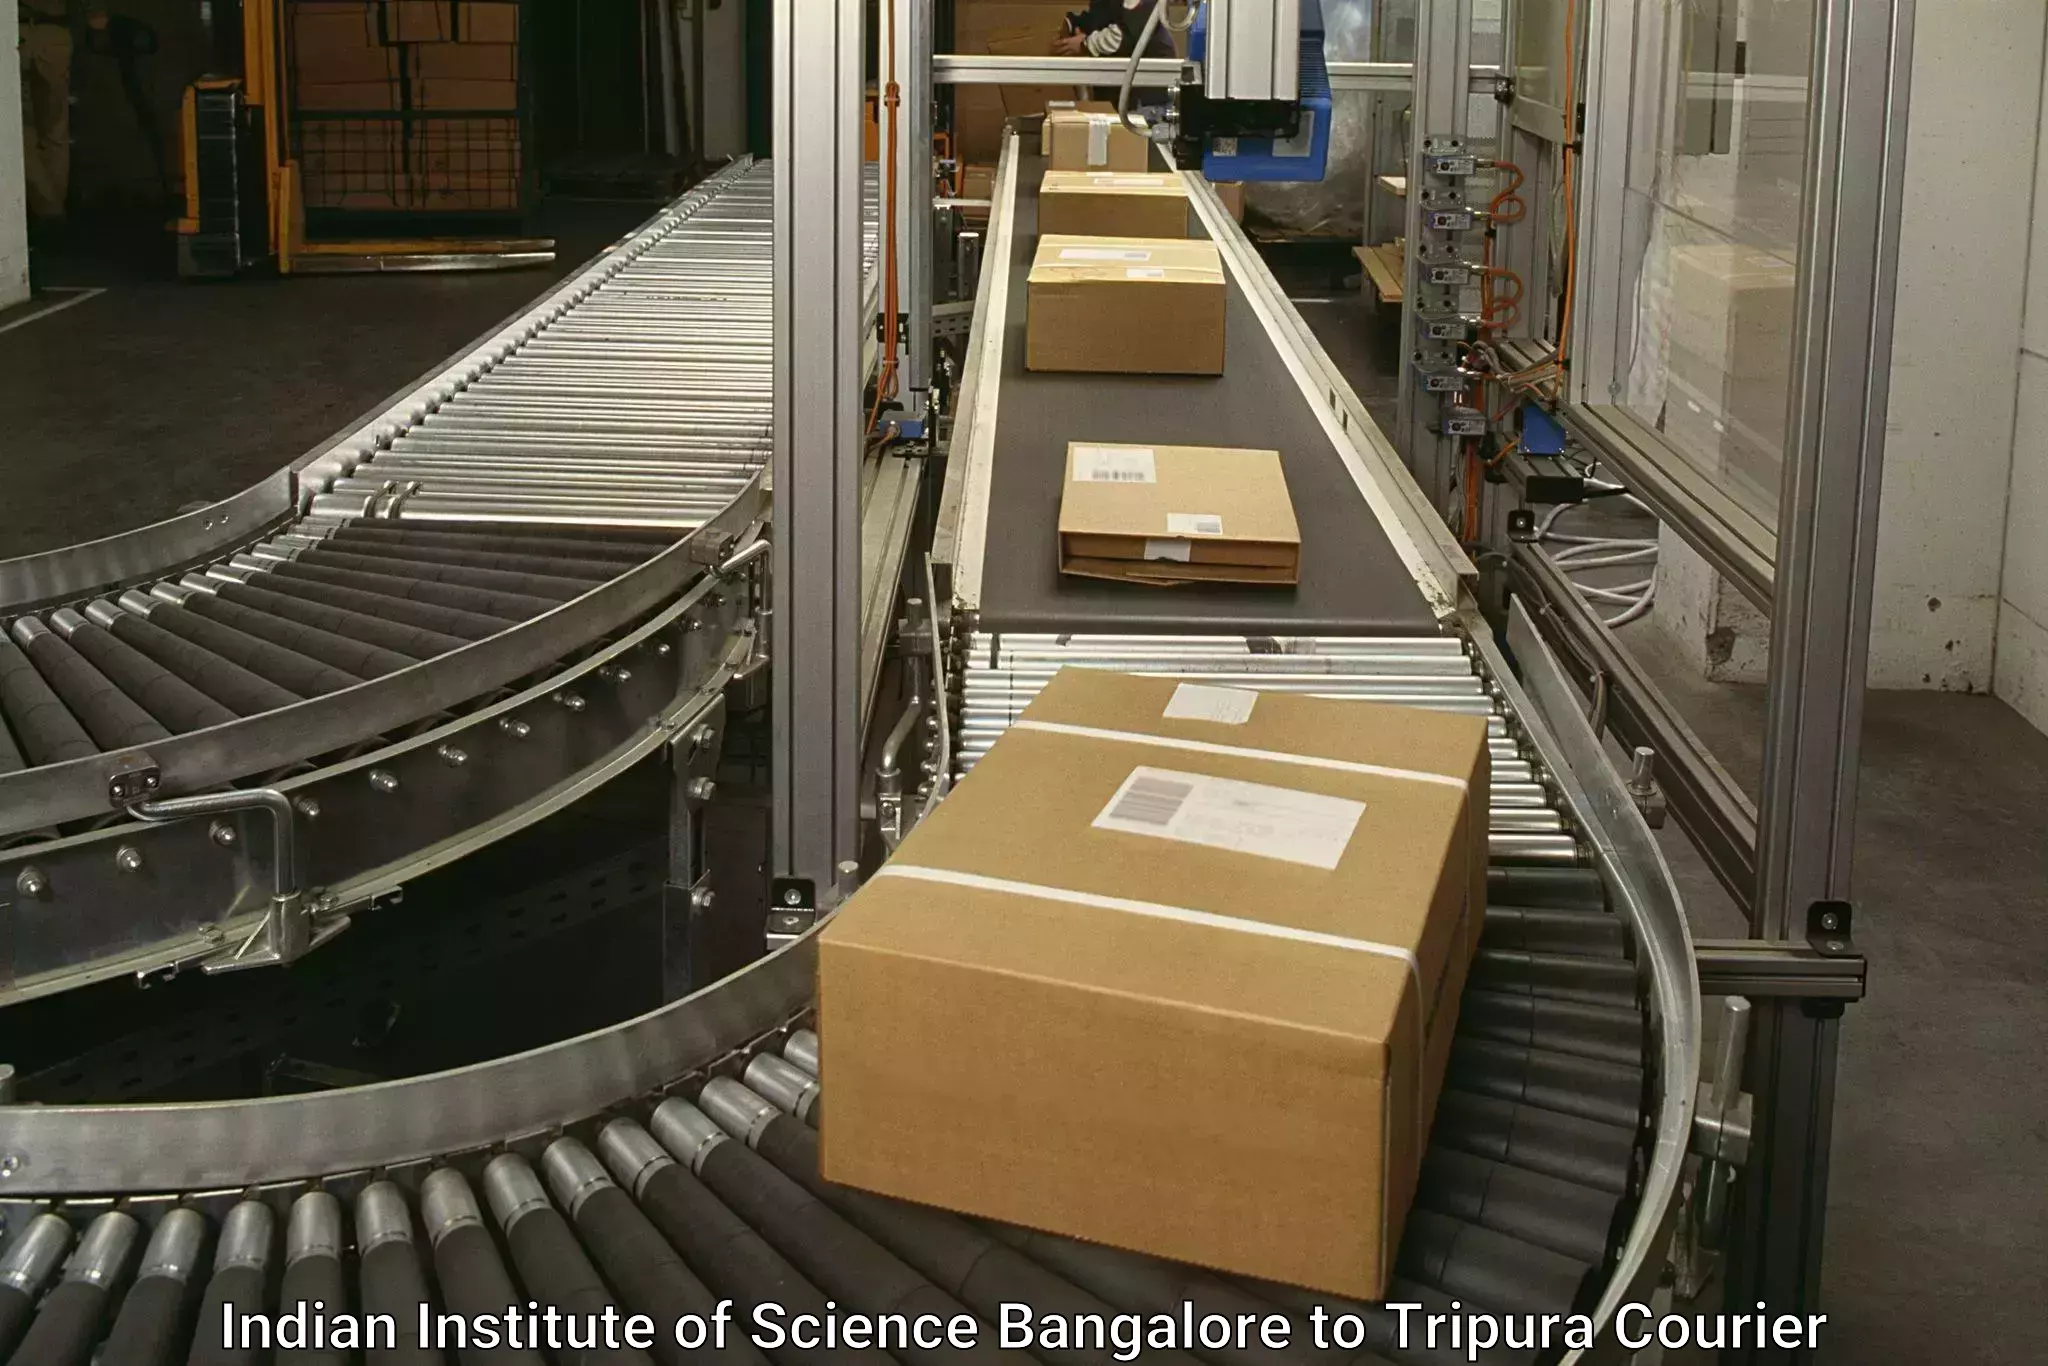 Global shipping solutions Indian Institute of Science Bangalore to Tripura